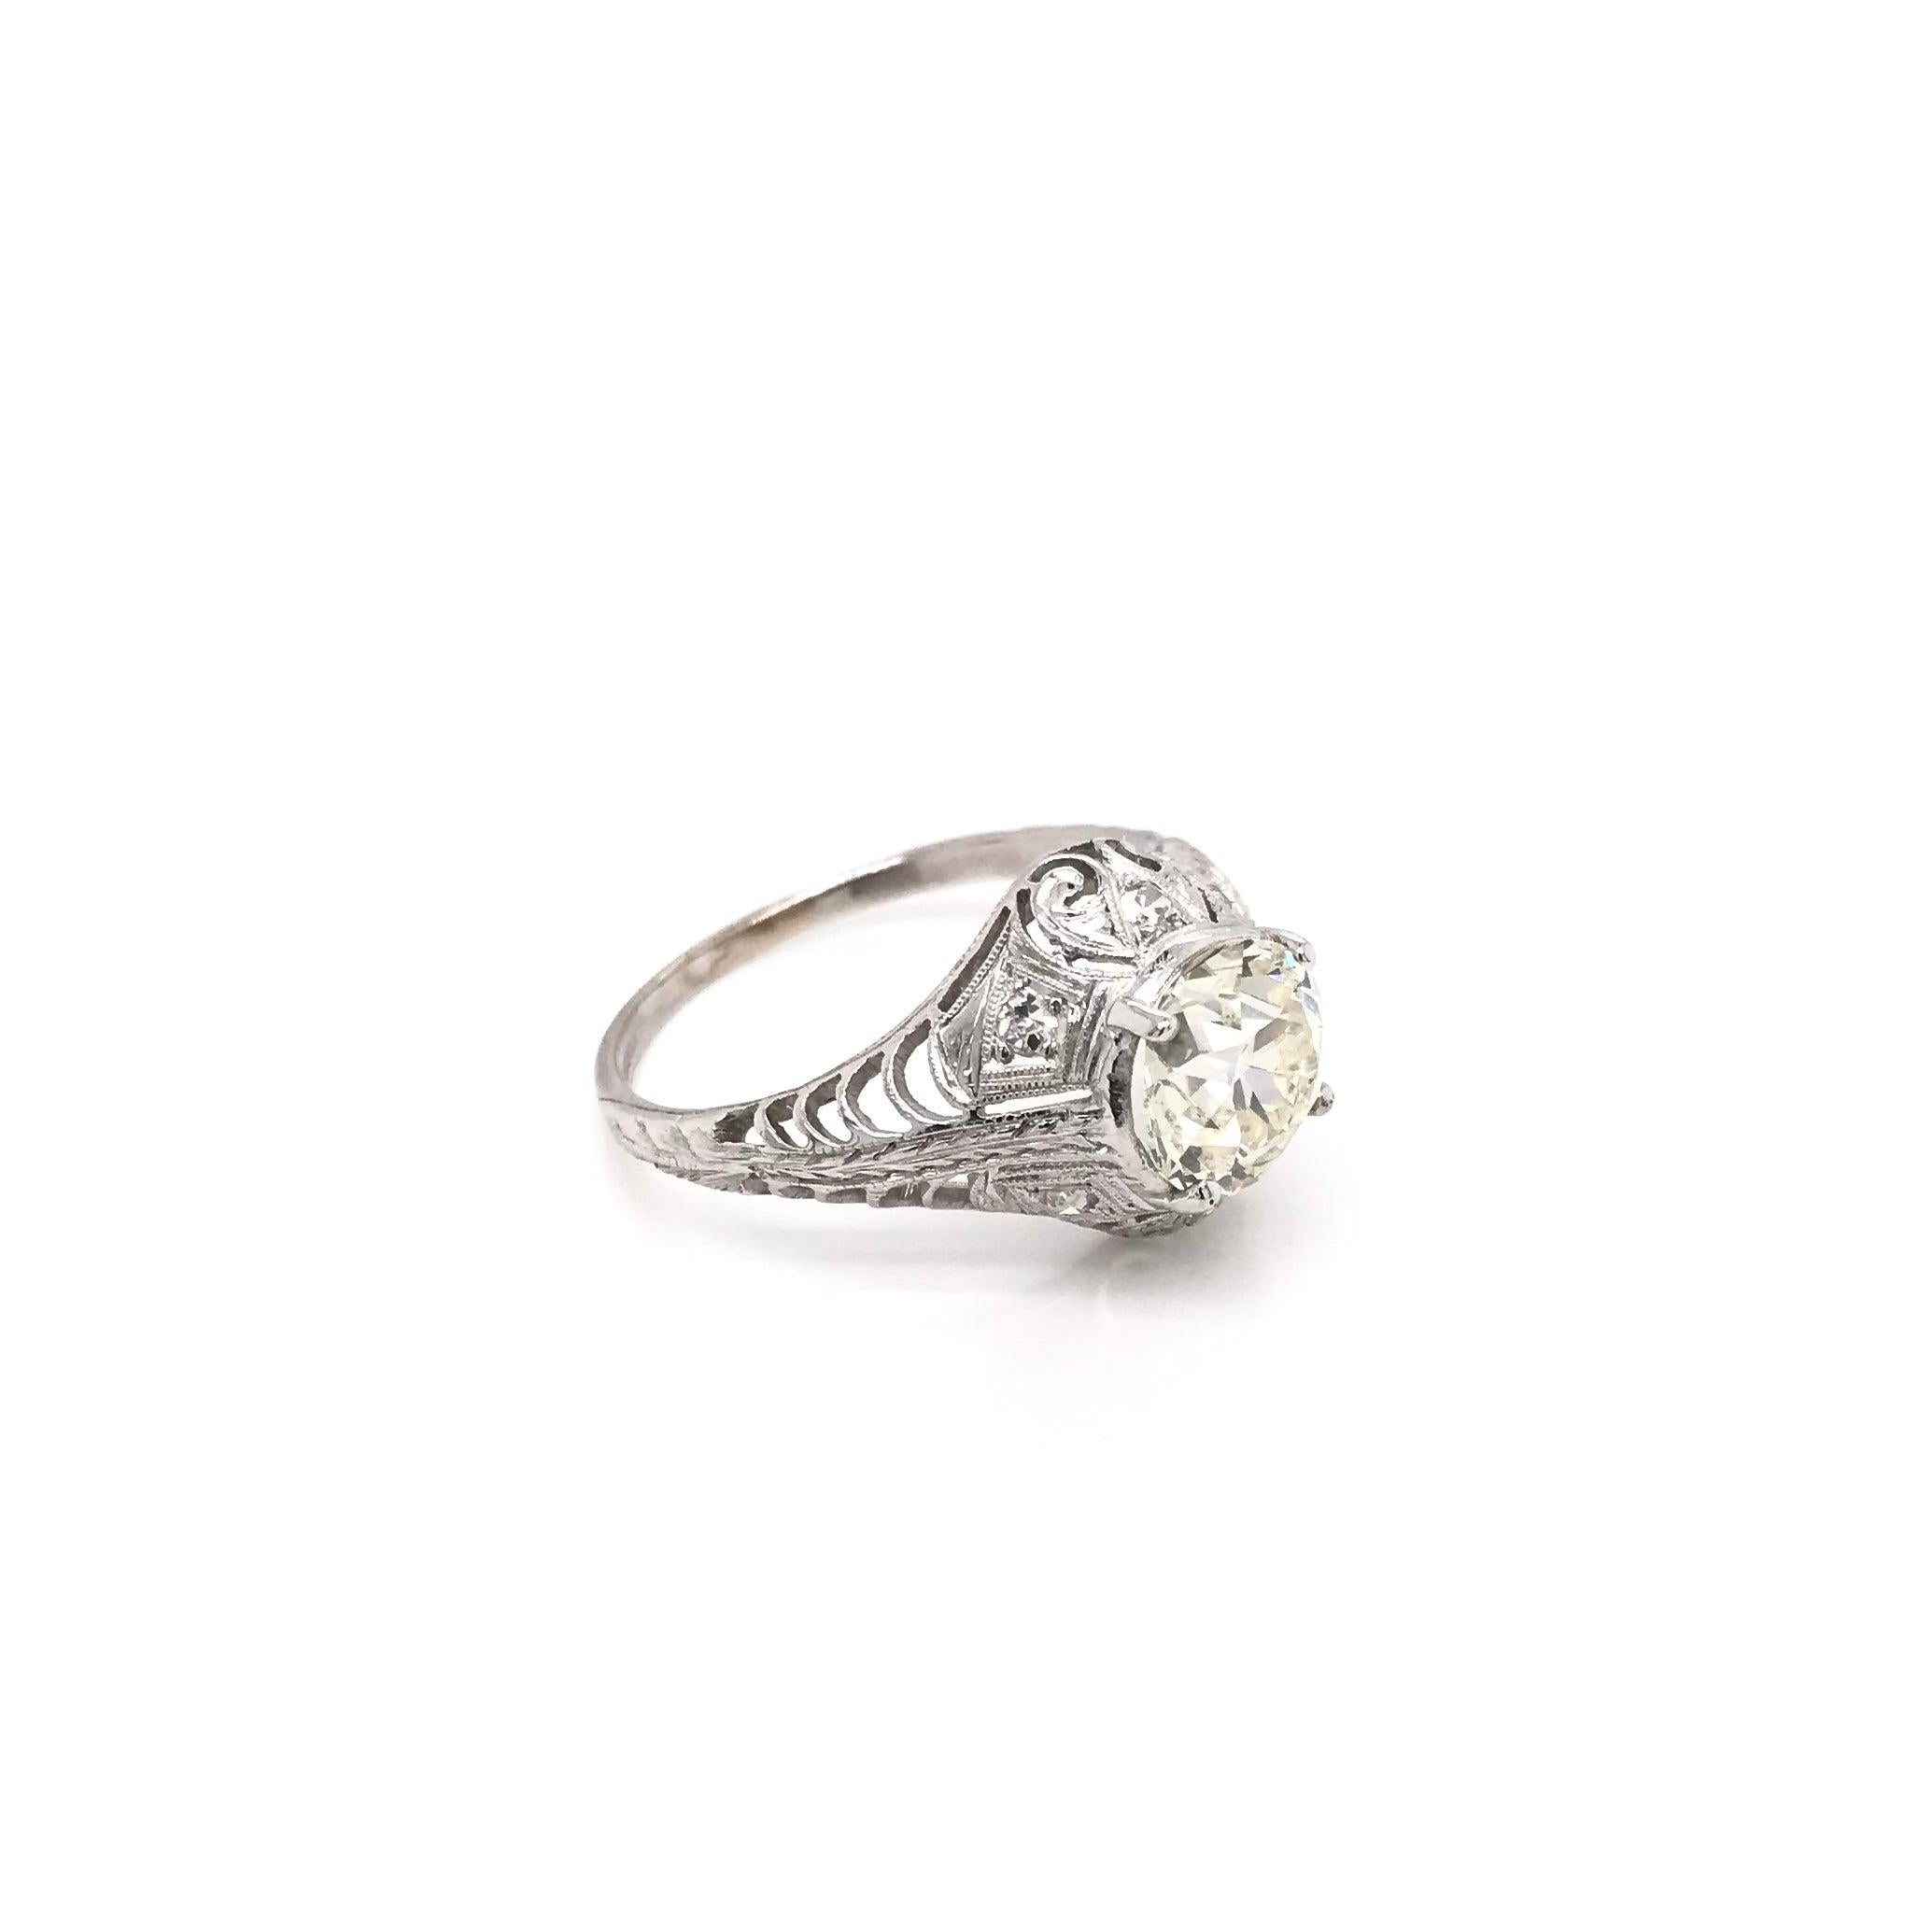 Edwardian 1.50 Carat Diamond Platinum Ring In Excellent Condition For Sale In Montgomery, AL